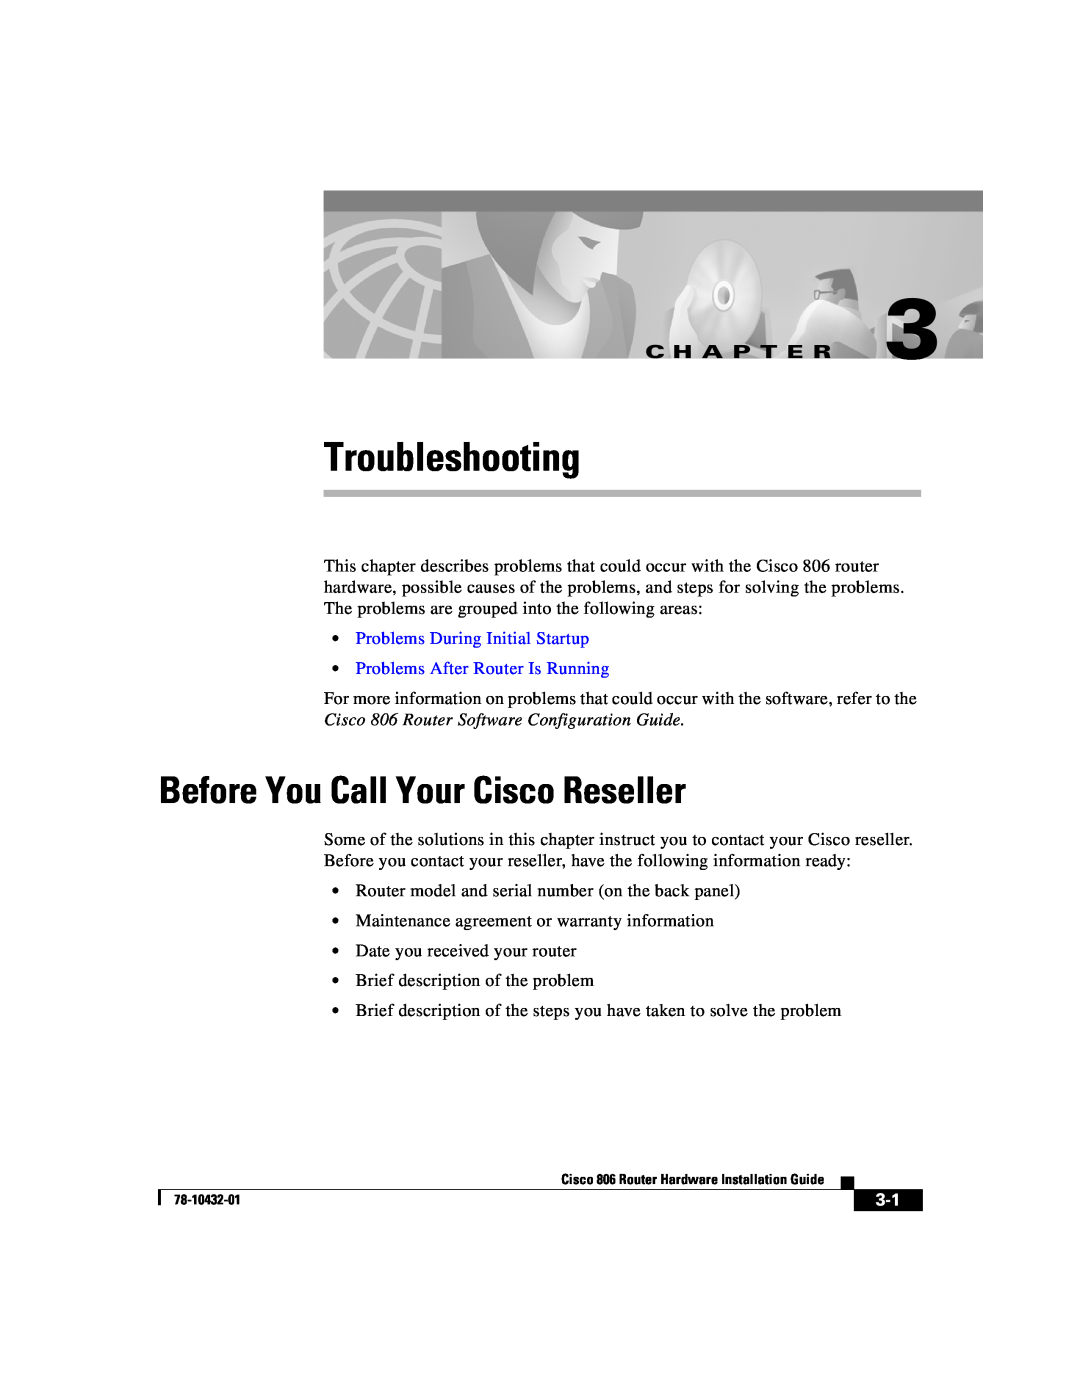 Cisco Systems 806 manual Troubleshooting, Before You Call Your Cisco Reseller, C H A P T E R 